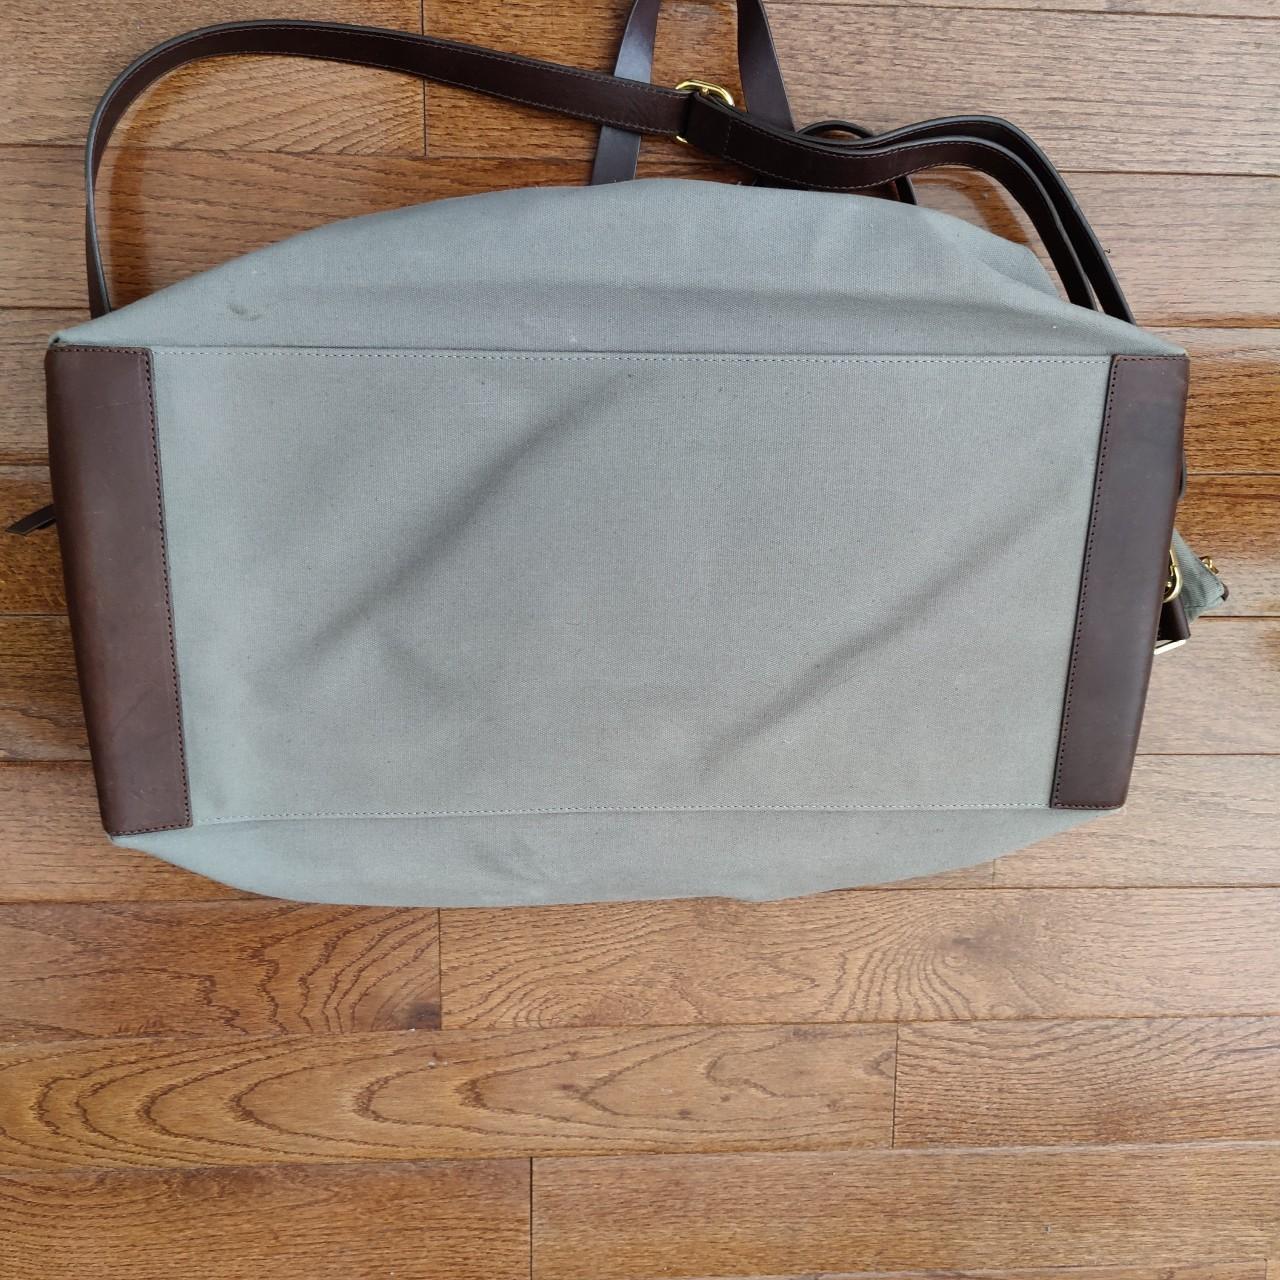 Product Image 4 - Cuyana Weekender Bag Charcoal Grey

Leather